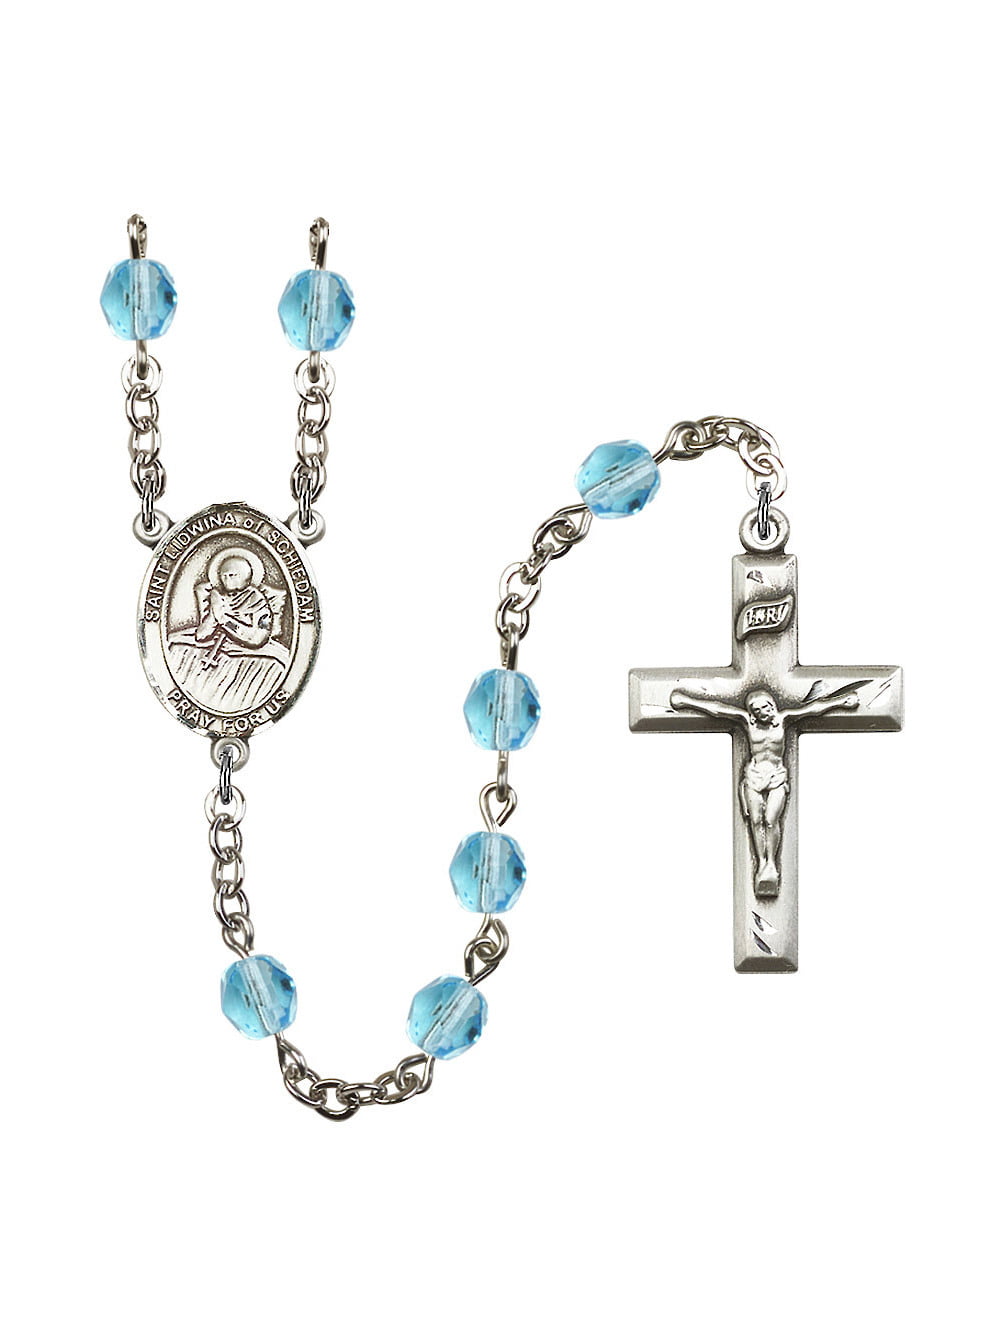 Gift Boxed Lidwina of Schiedam Center and 1 3/8 x 3/4 inch Crucifix Silver Finish St St Lidwina of Schiedam Rosary with 6mm Zircon Color Fire Polished Beads